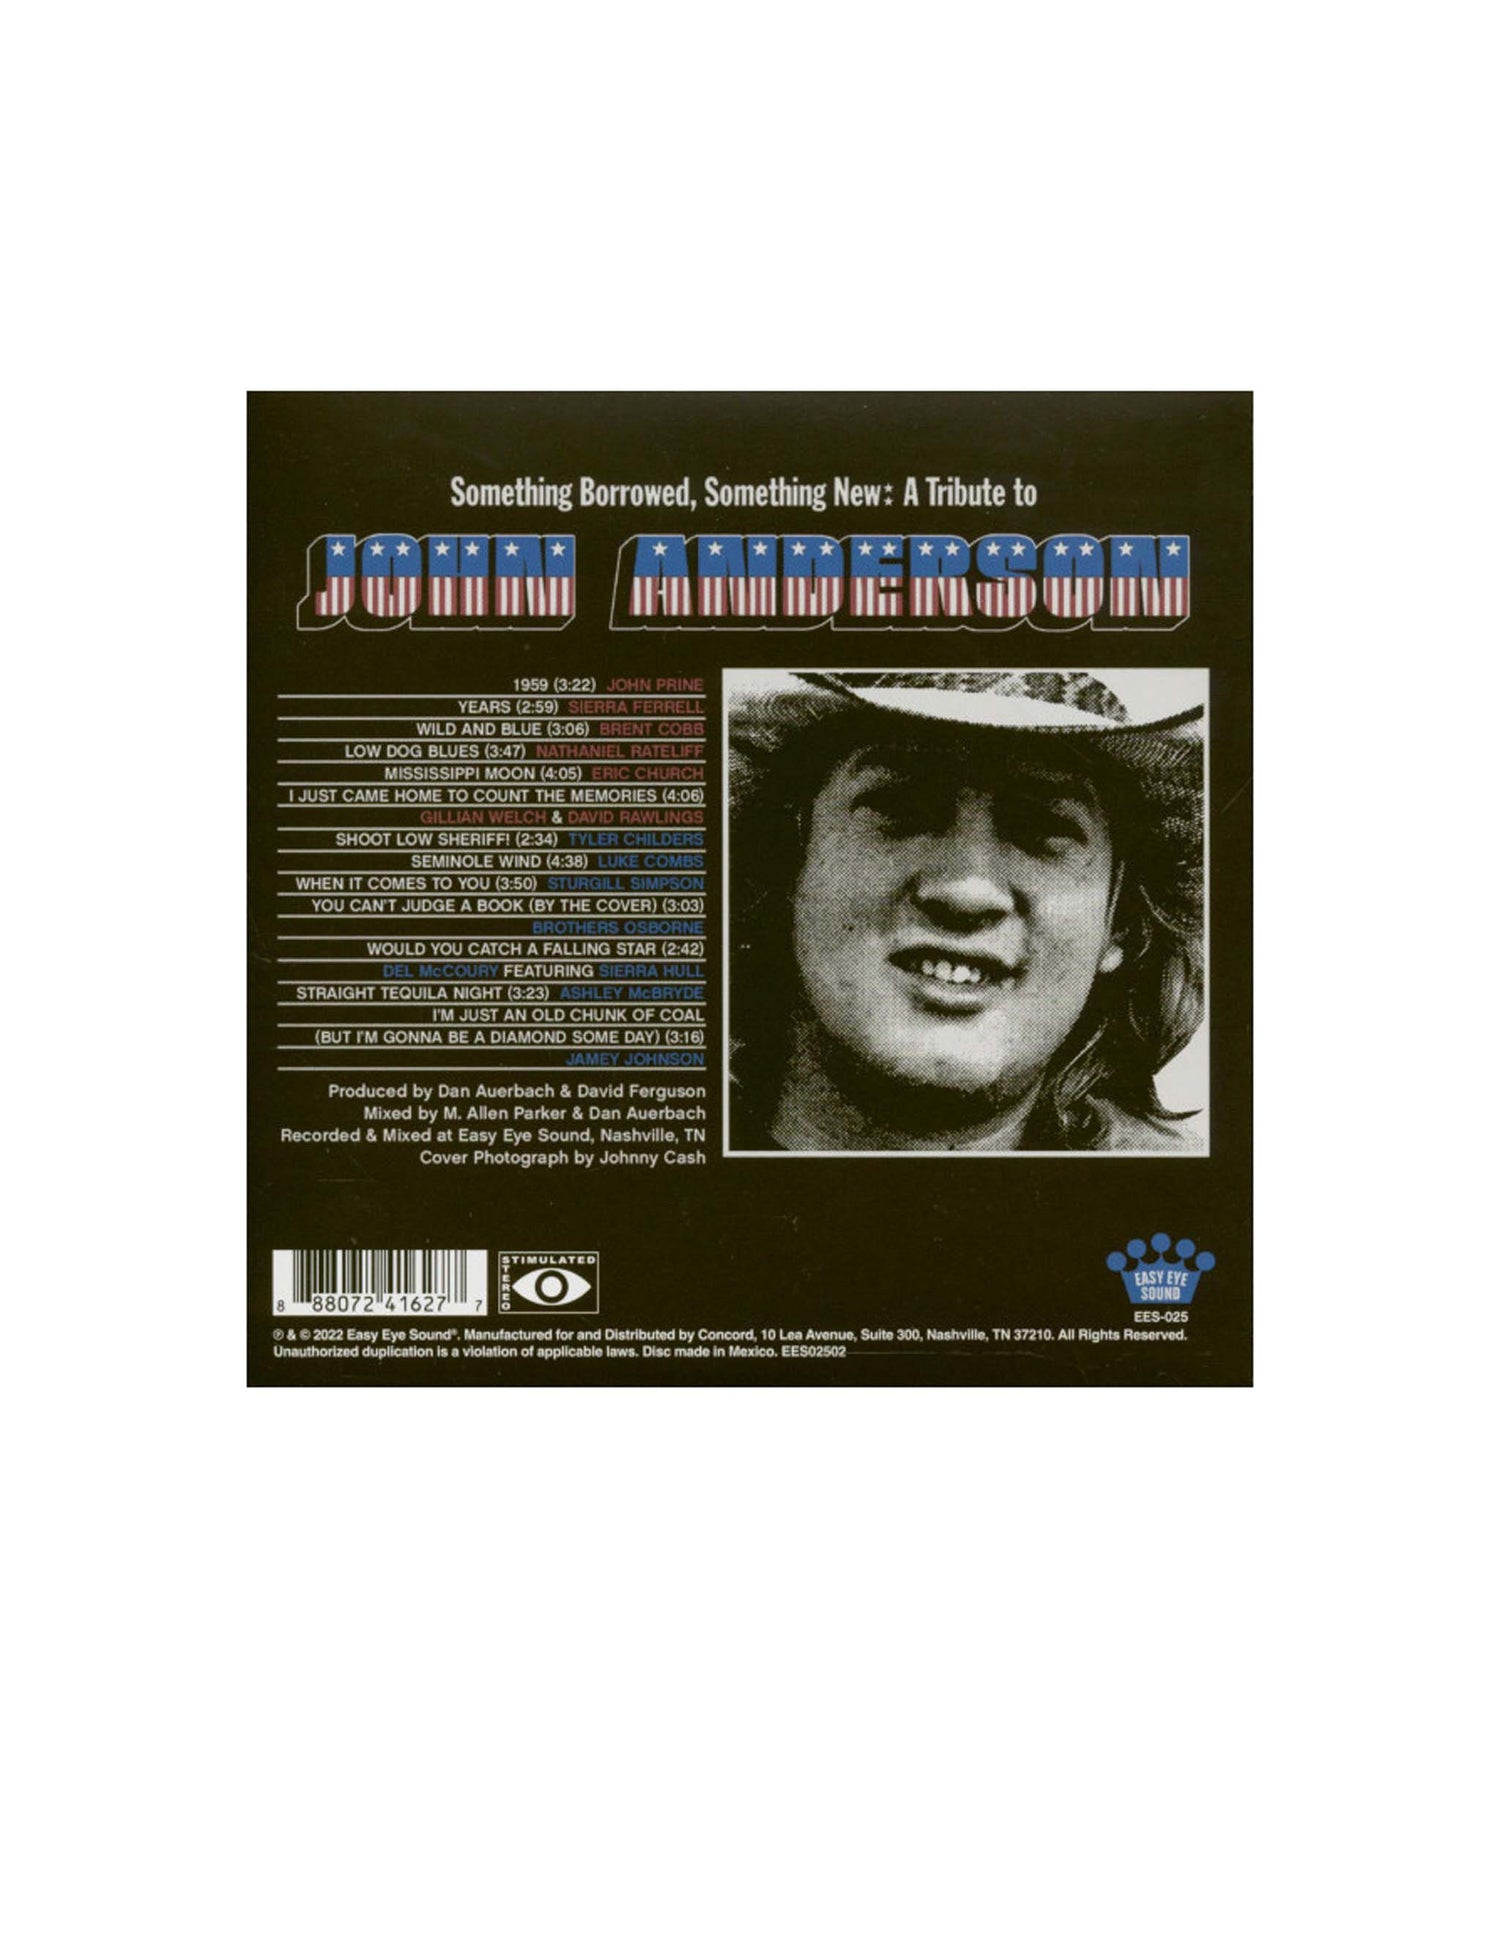 Something Borrowed, Something New: A Tribute To John Anderson (CD)